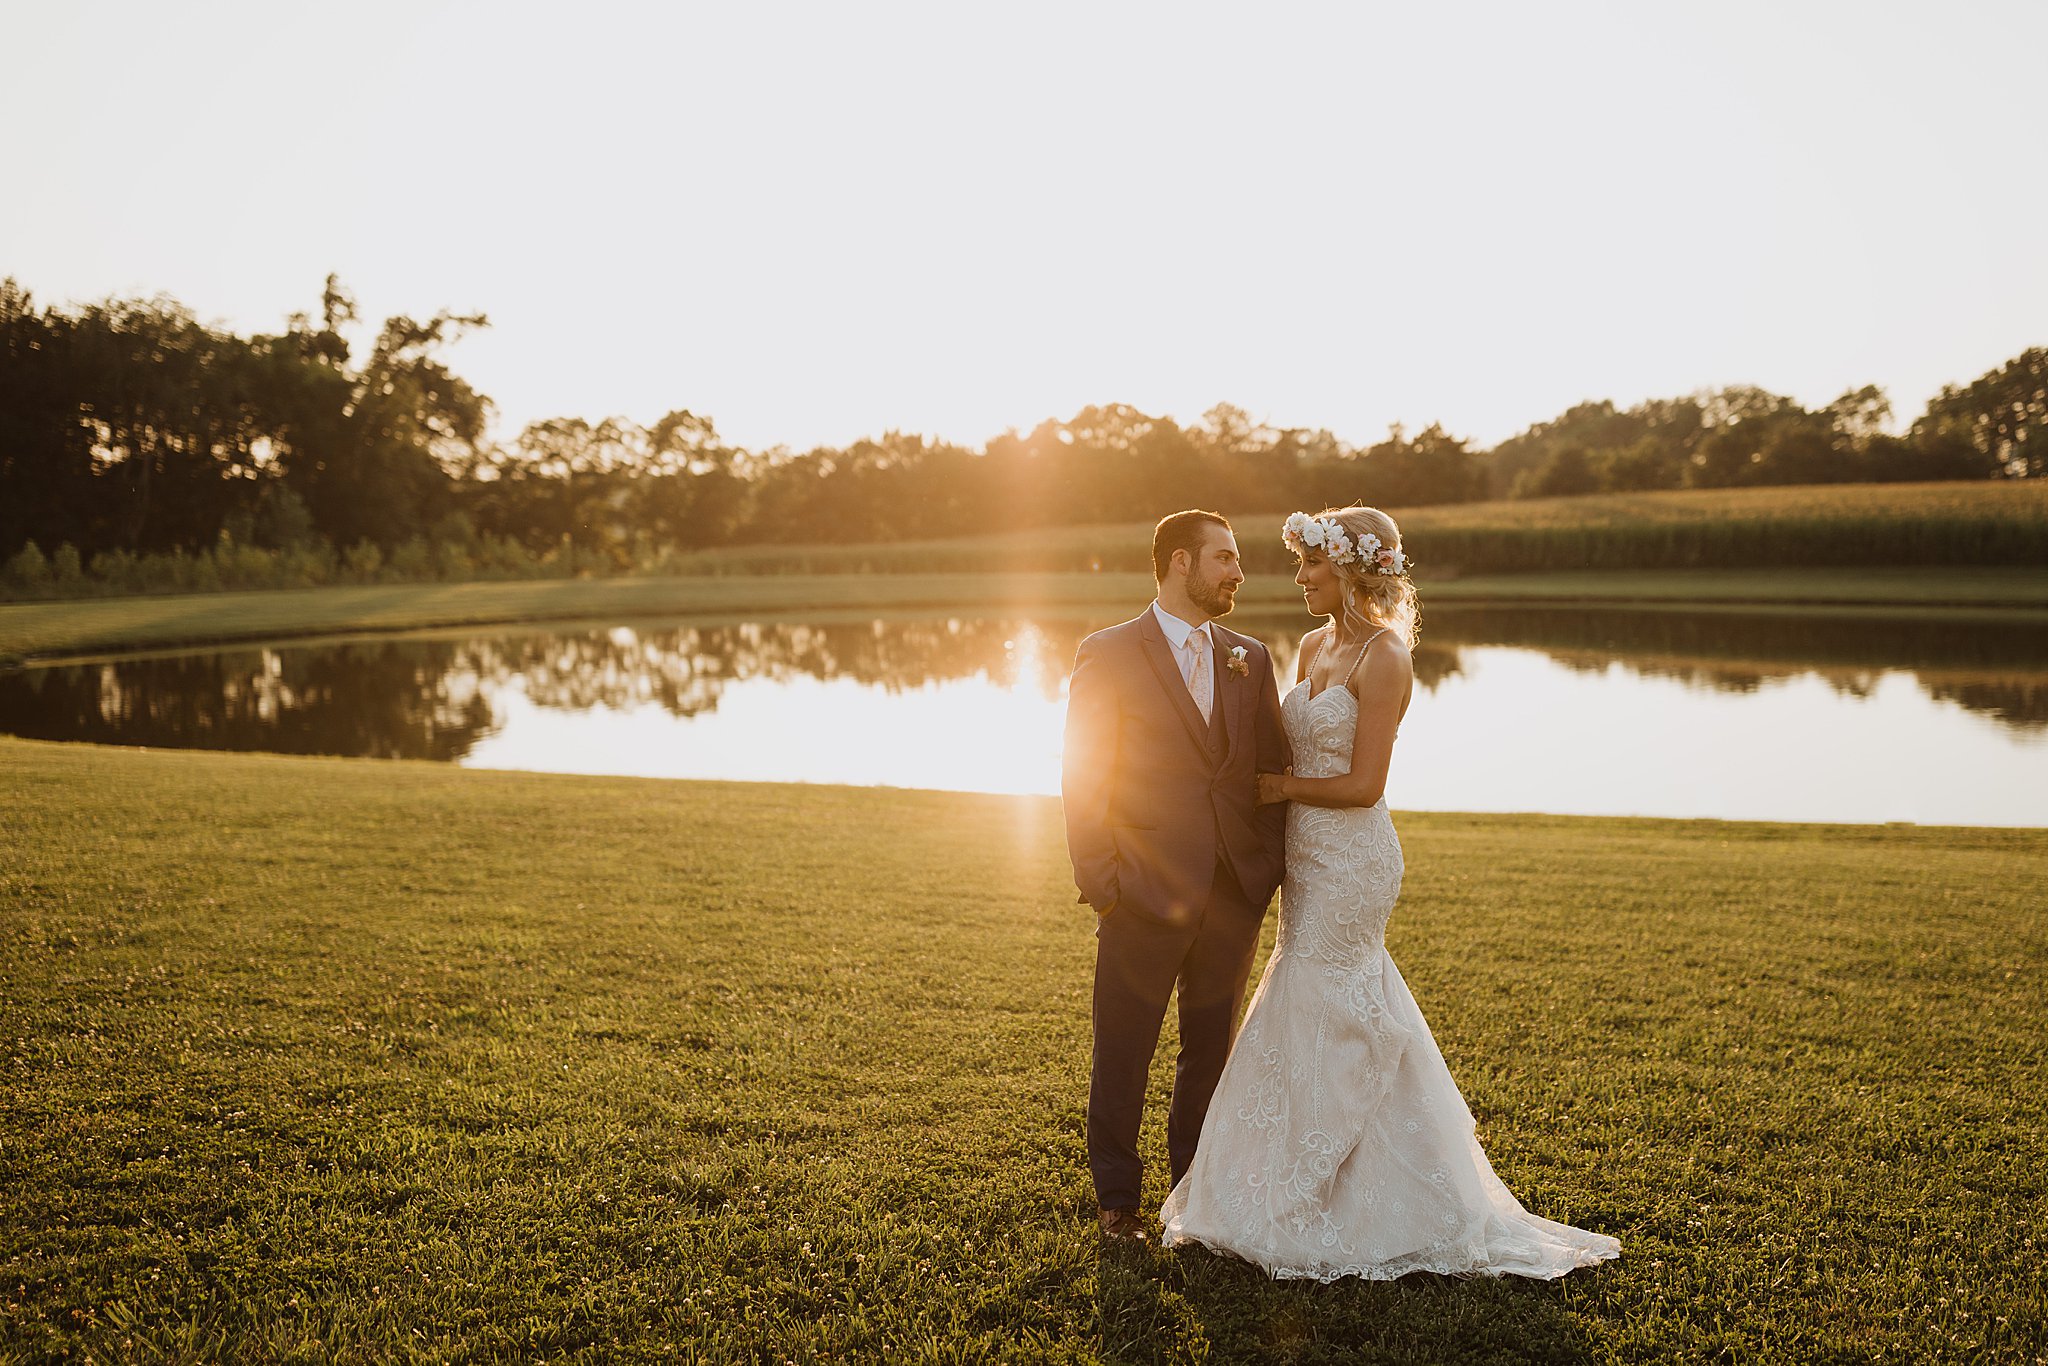 Bride and Groom at Sunset in front of Pond